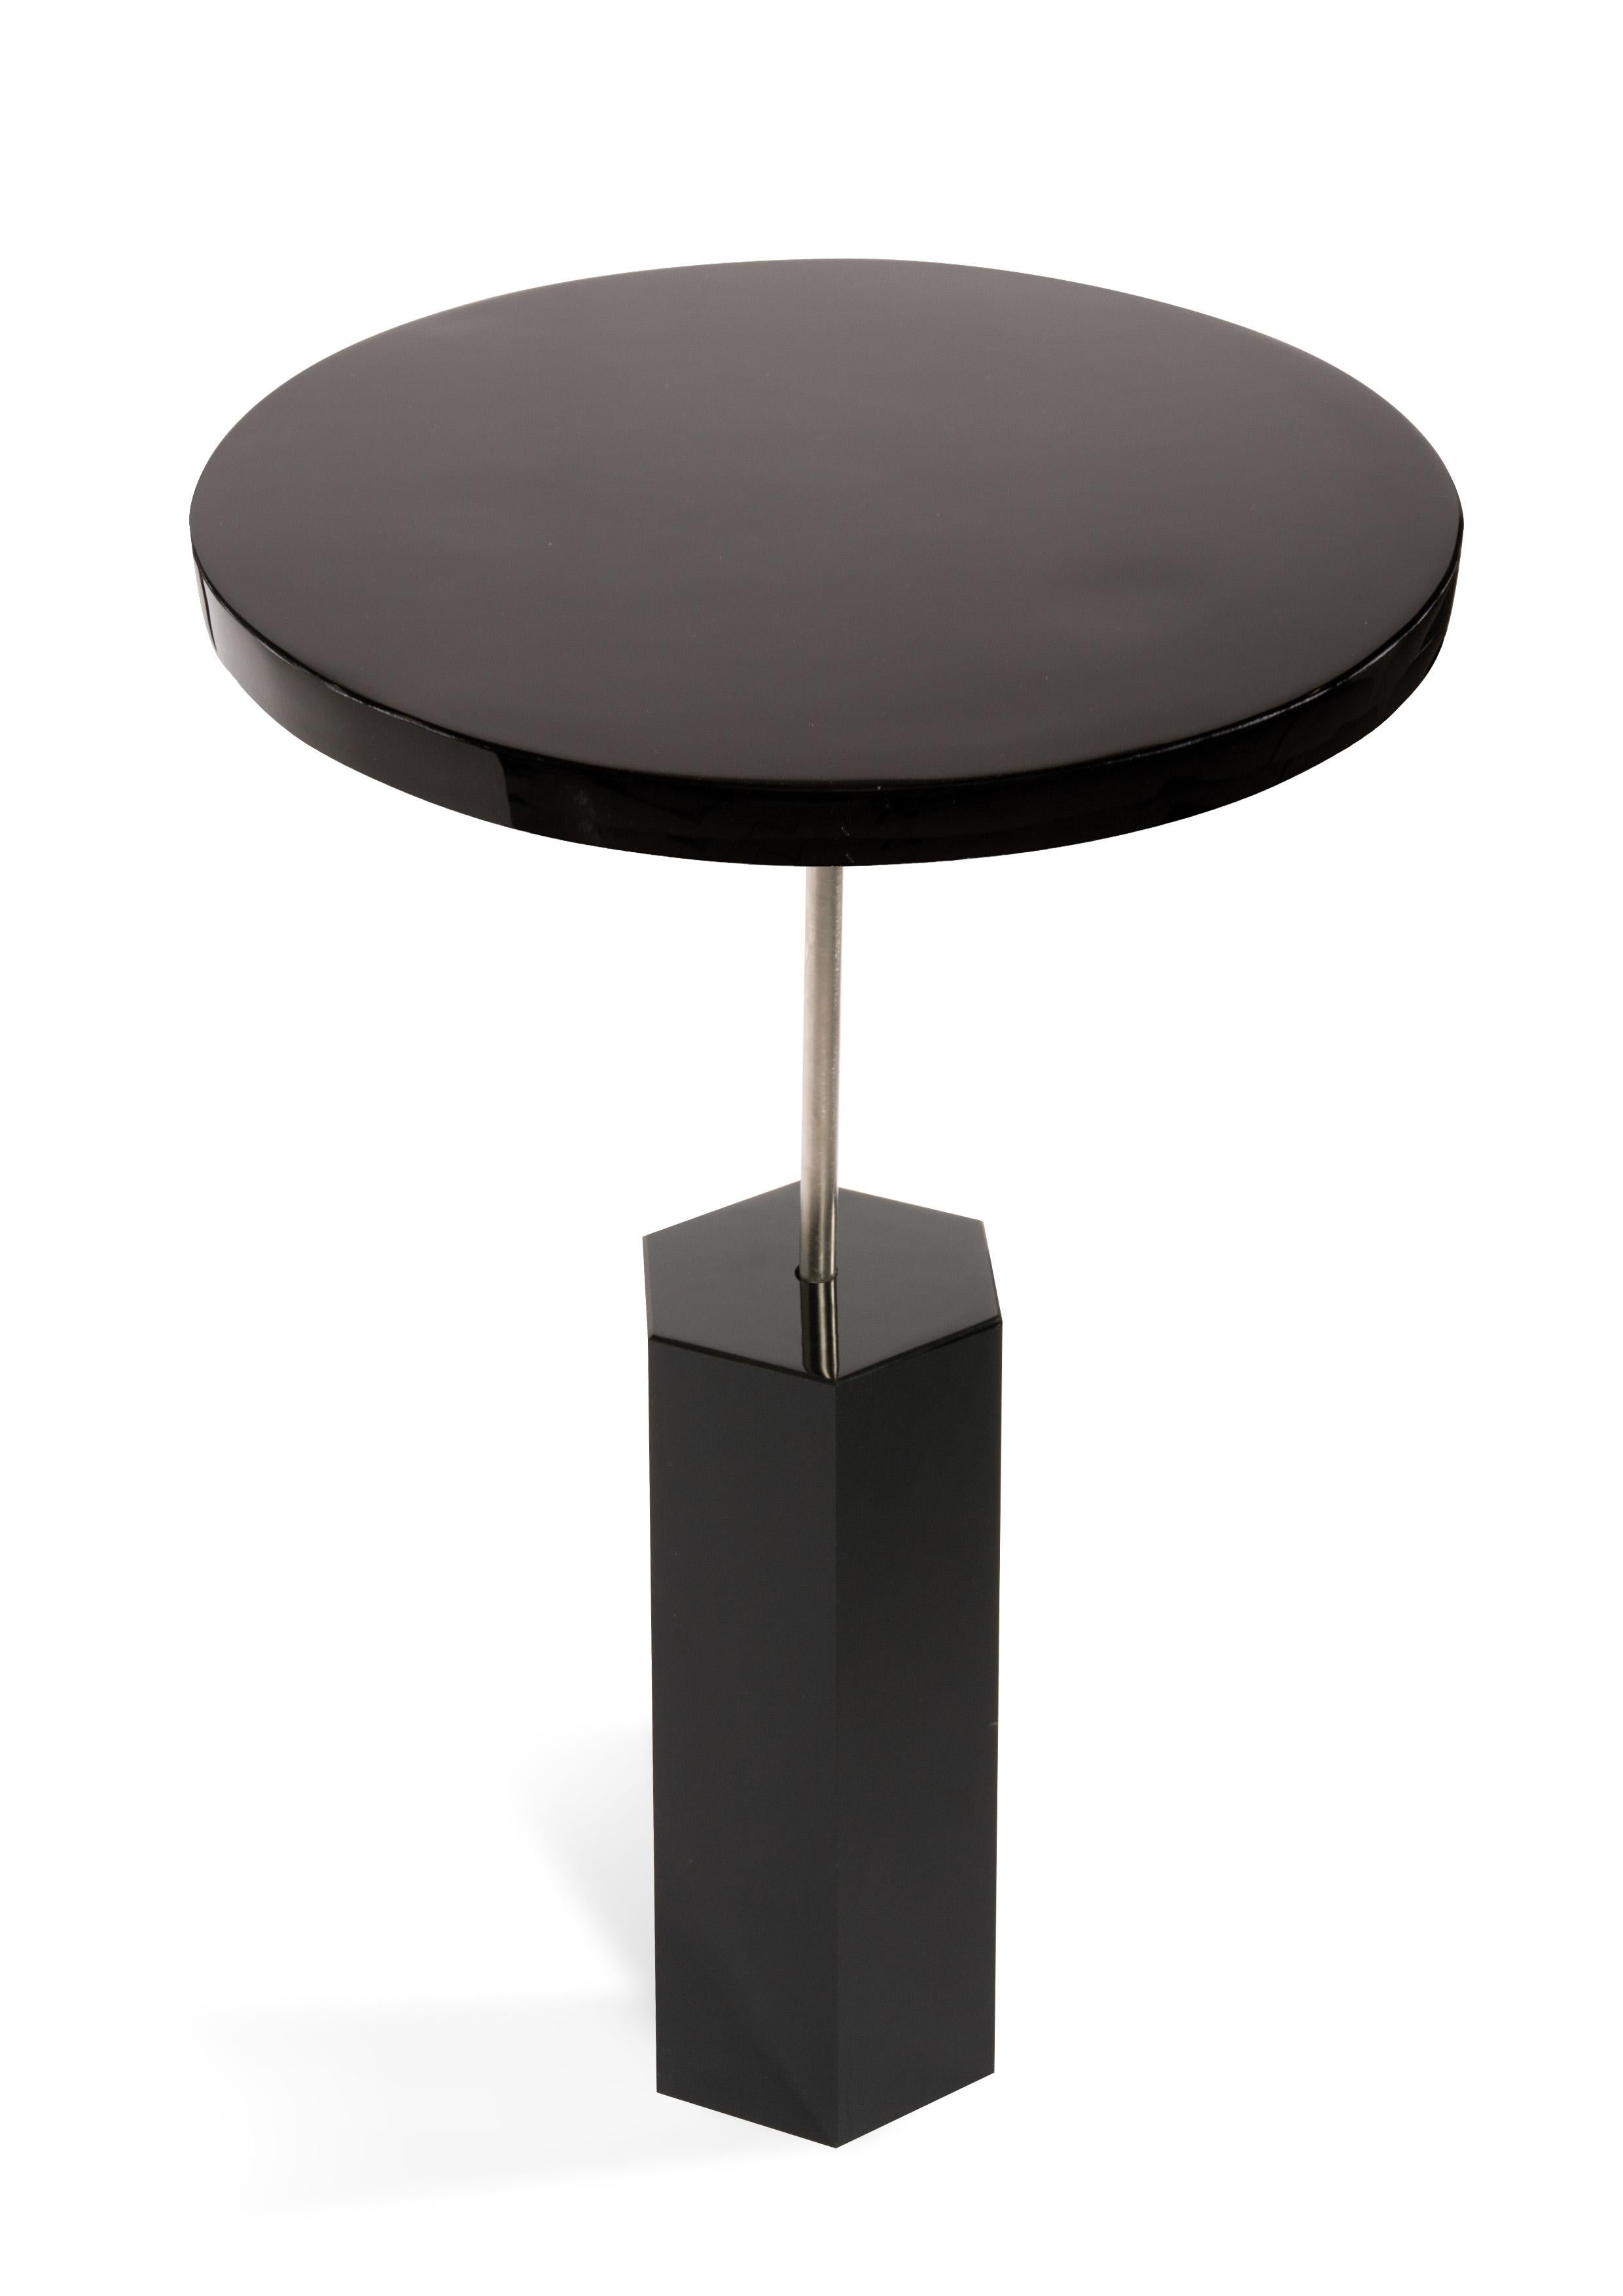 Organic Modern Configurable Geometry I Side Table by Sten Studio, REP by Tuleste Factory